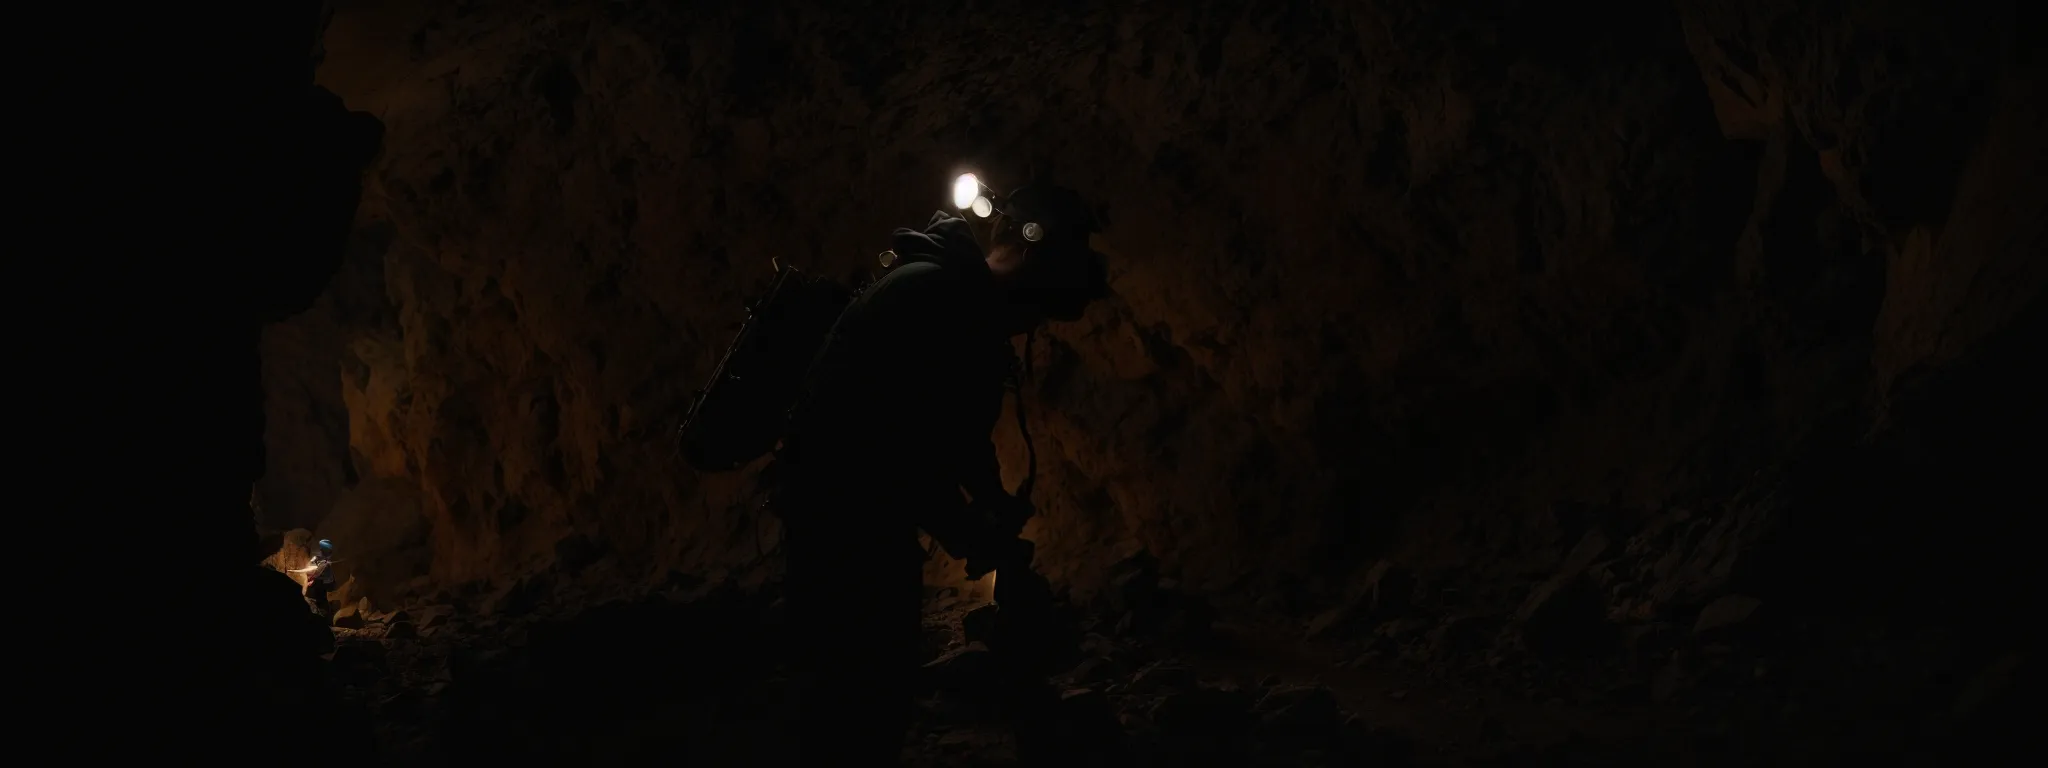 an image of a lone miner with a pickaxe and headlamp chipping away at a rock face deep in a dimly lit tunnel.